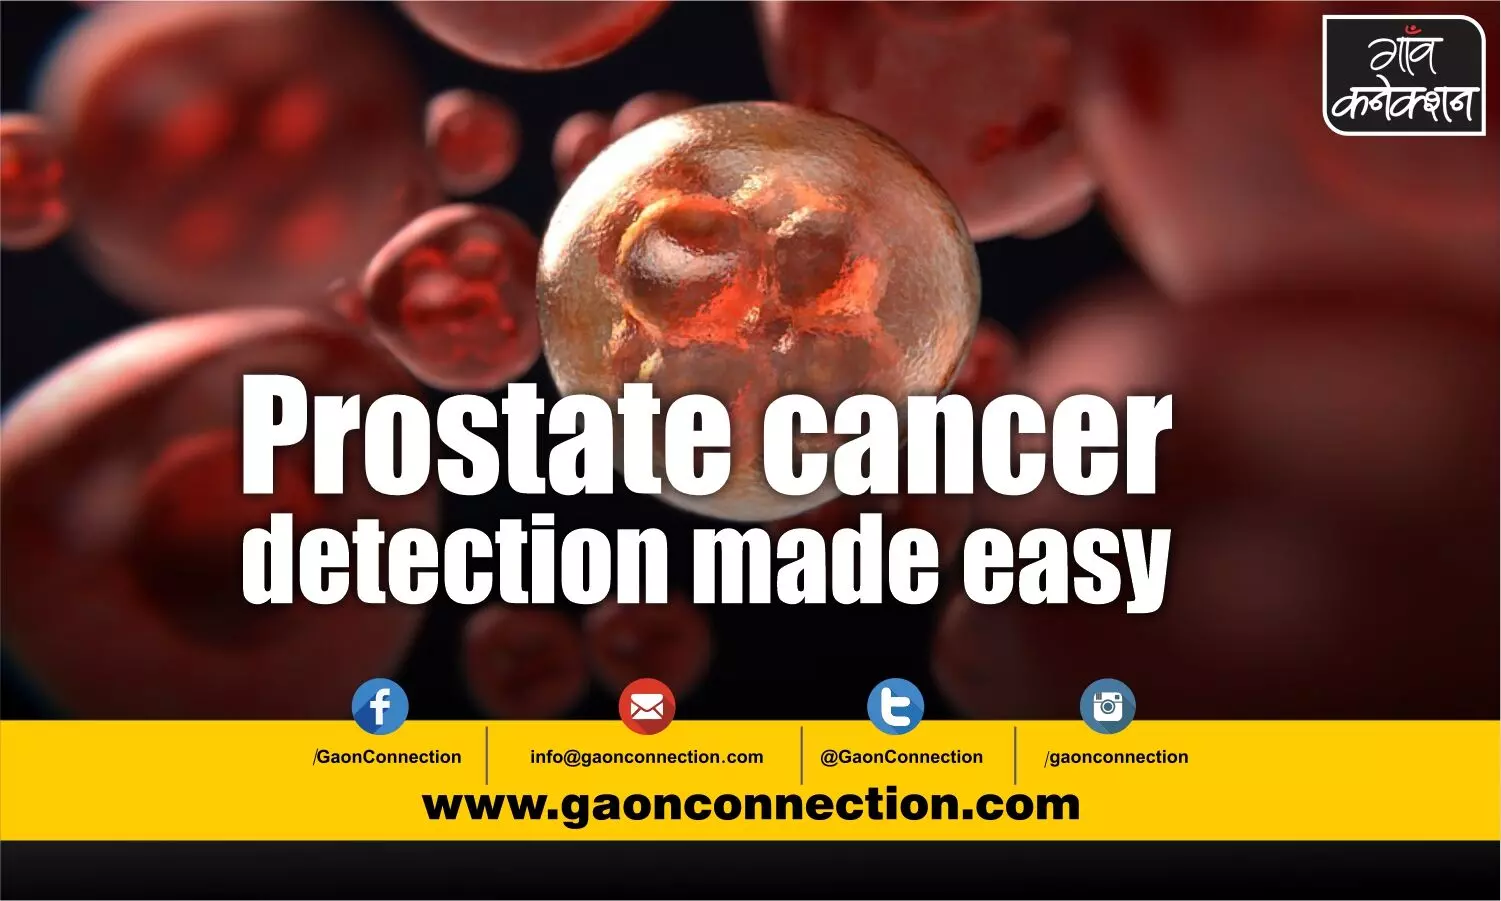 New sensor may help early detection of prostate cancer